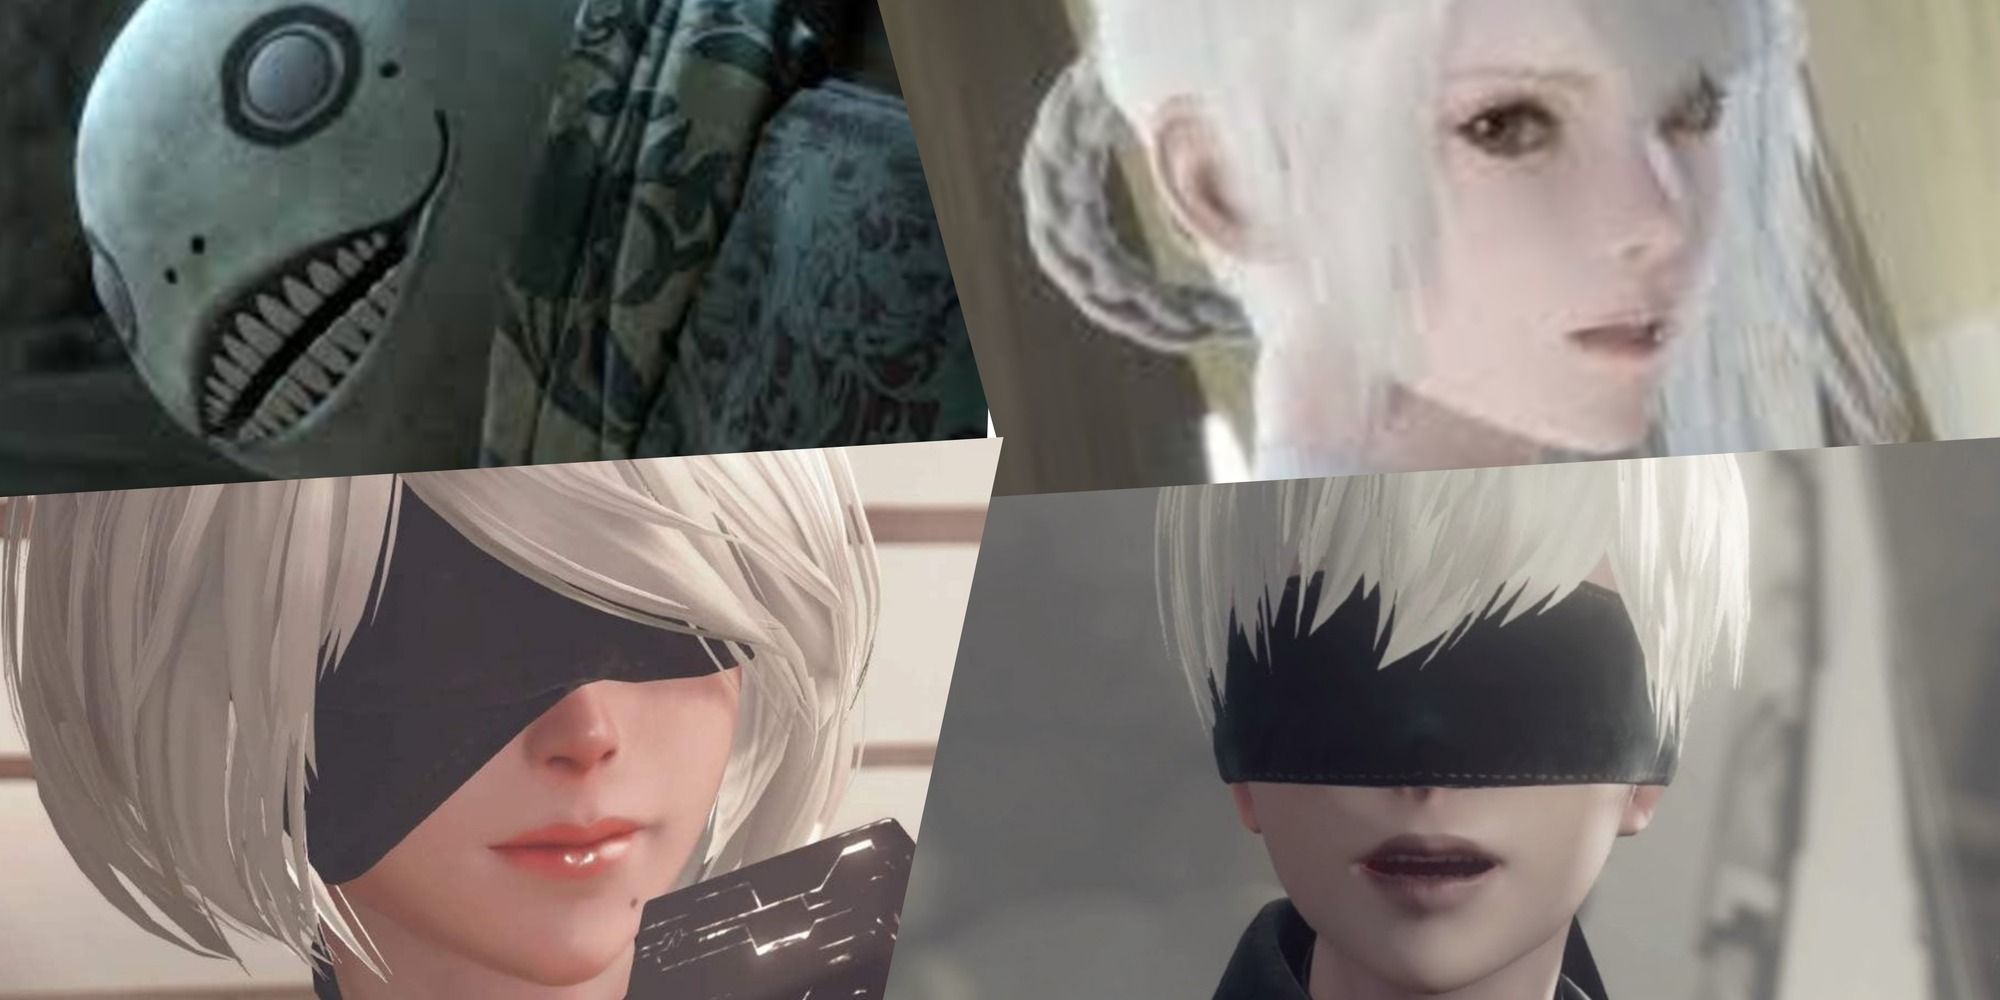 NieR Replicant Automata Characters Emil Kaine 2B and 9S